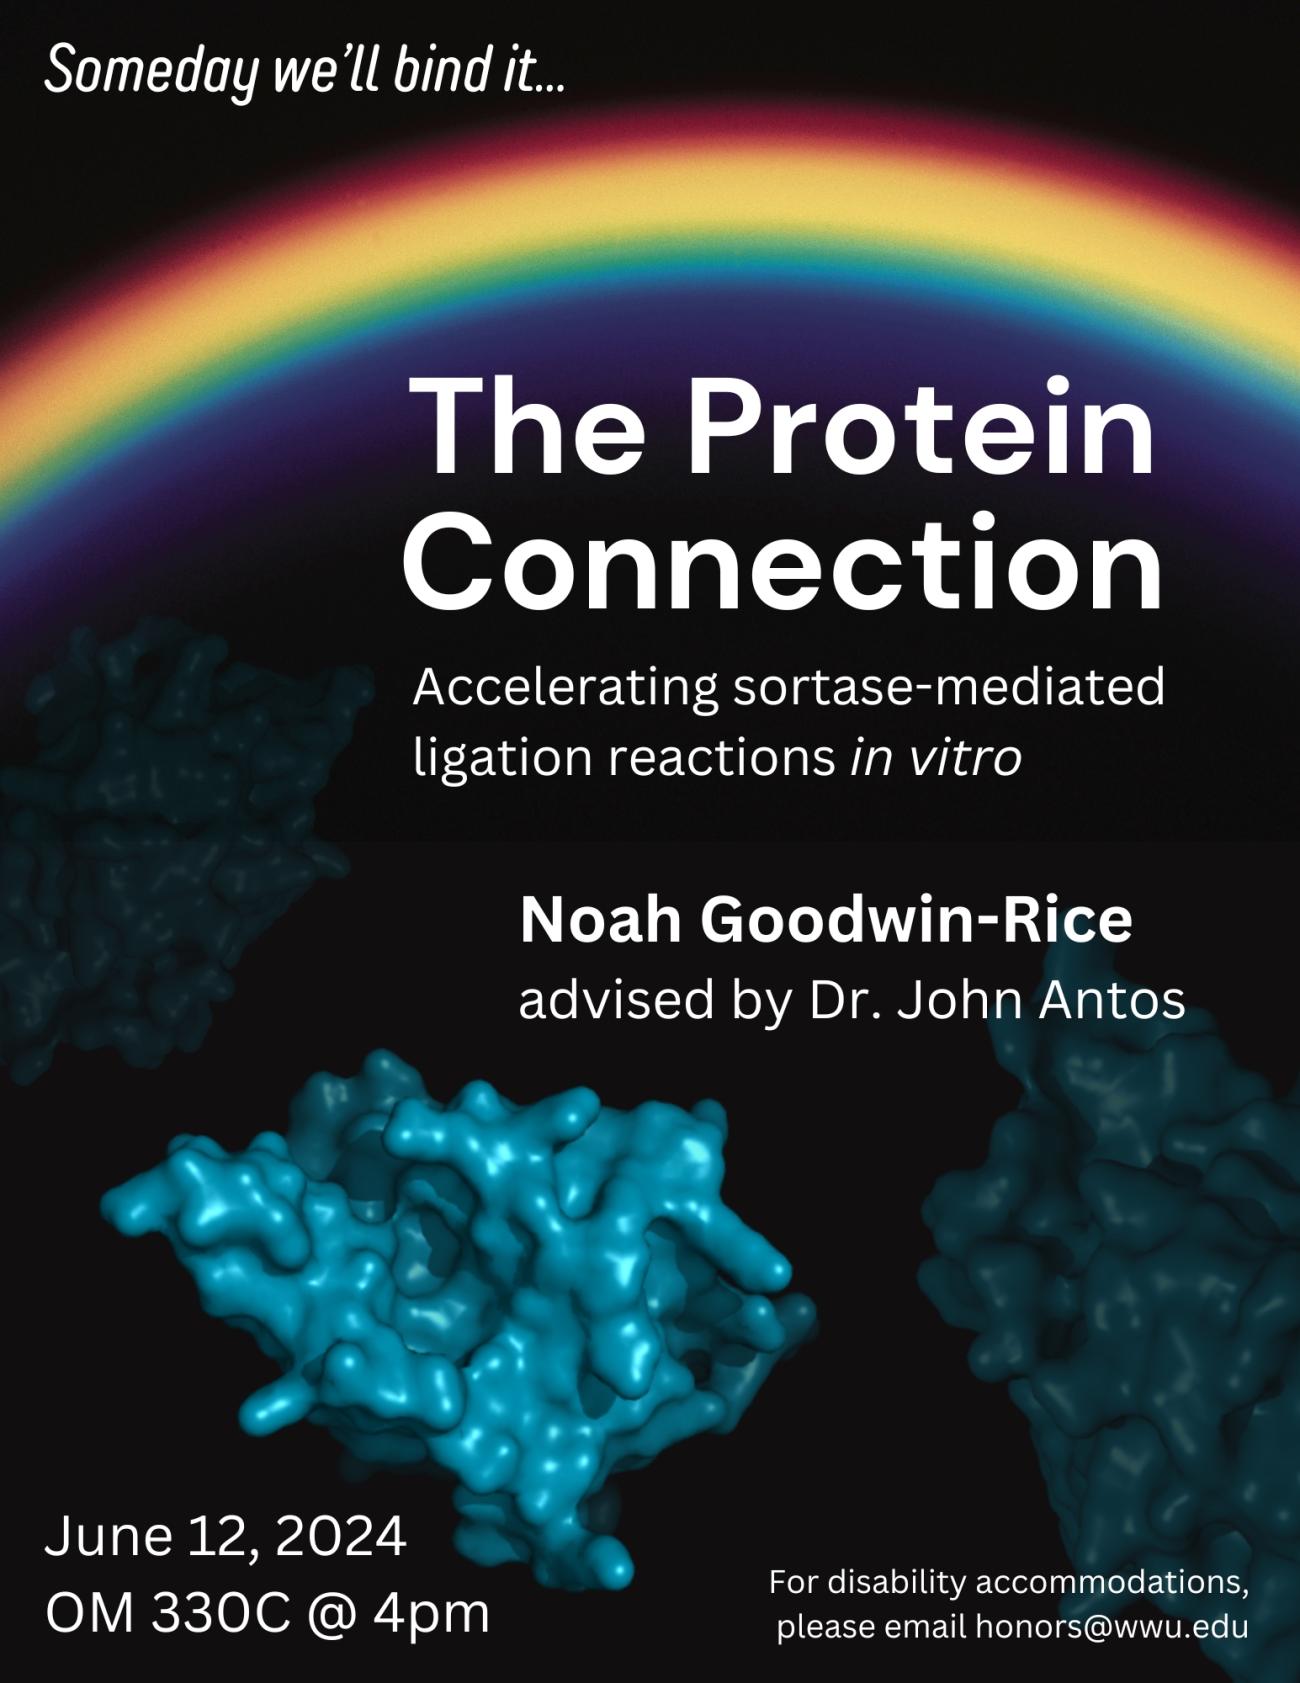 Black background containing a rainbow across the top and blue surface representations of three globular proteins below. Text reads “Someday we'll bind it... The Protein Connection. Accelerating sortase-mediated ligation reactions in vitro. Noah Goodwin-Rice, advised by Dr. John Antos. June 12, 2024, OM 330C @ 4pm. For disability accommodations, please email honors@wwu.edu”. 